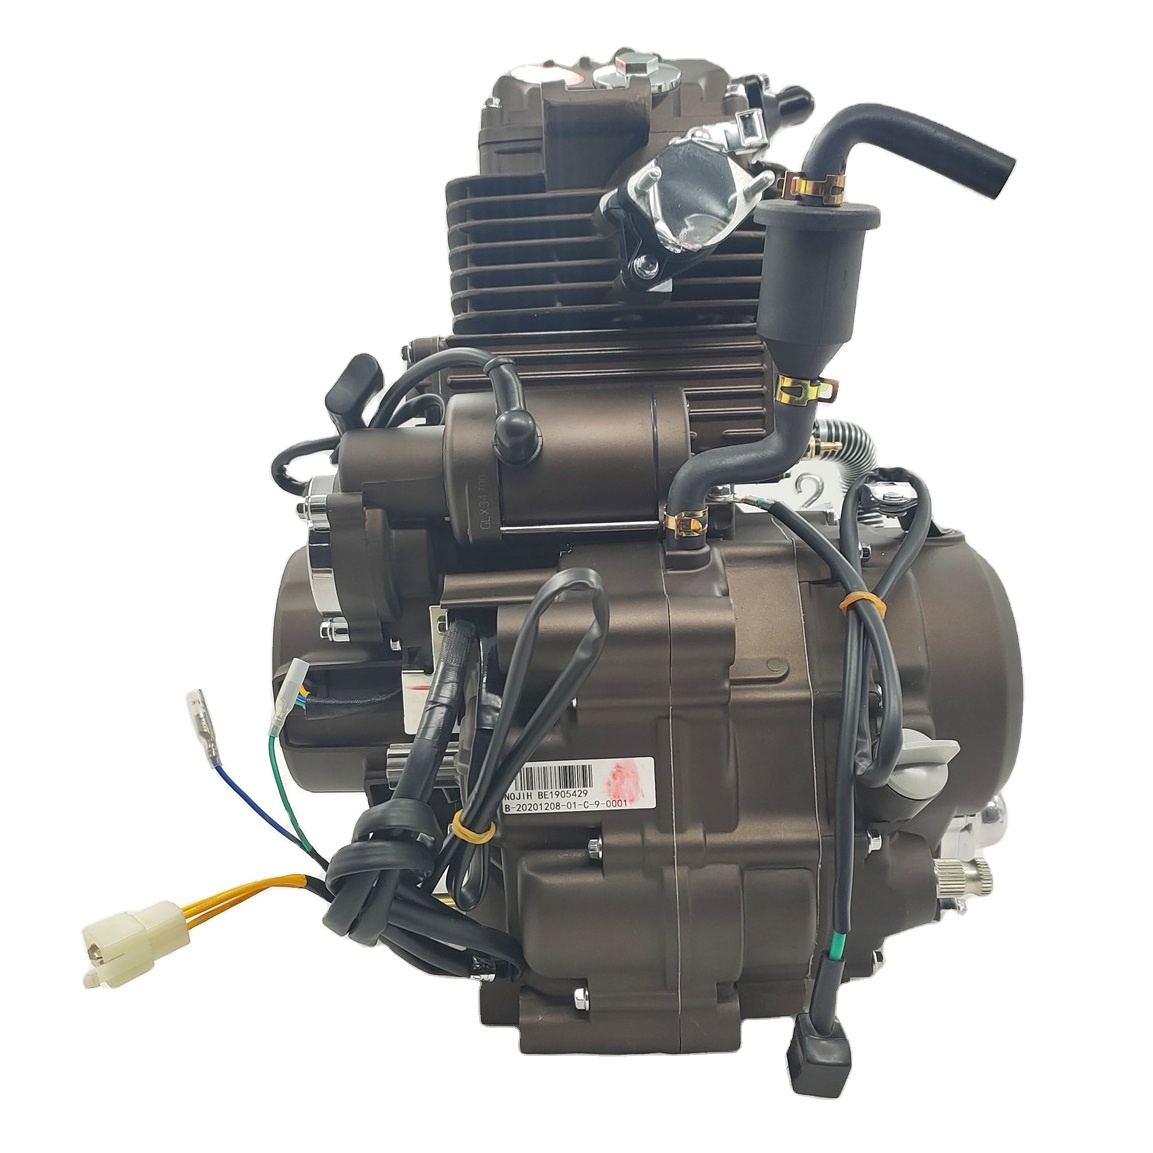 DAYANG LIFAN CG Cool 250cc Motorcycle Engine Assembly Single Cylinder Four Stroke Style China  Origin Quality CCC